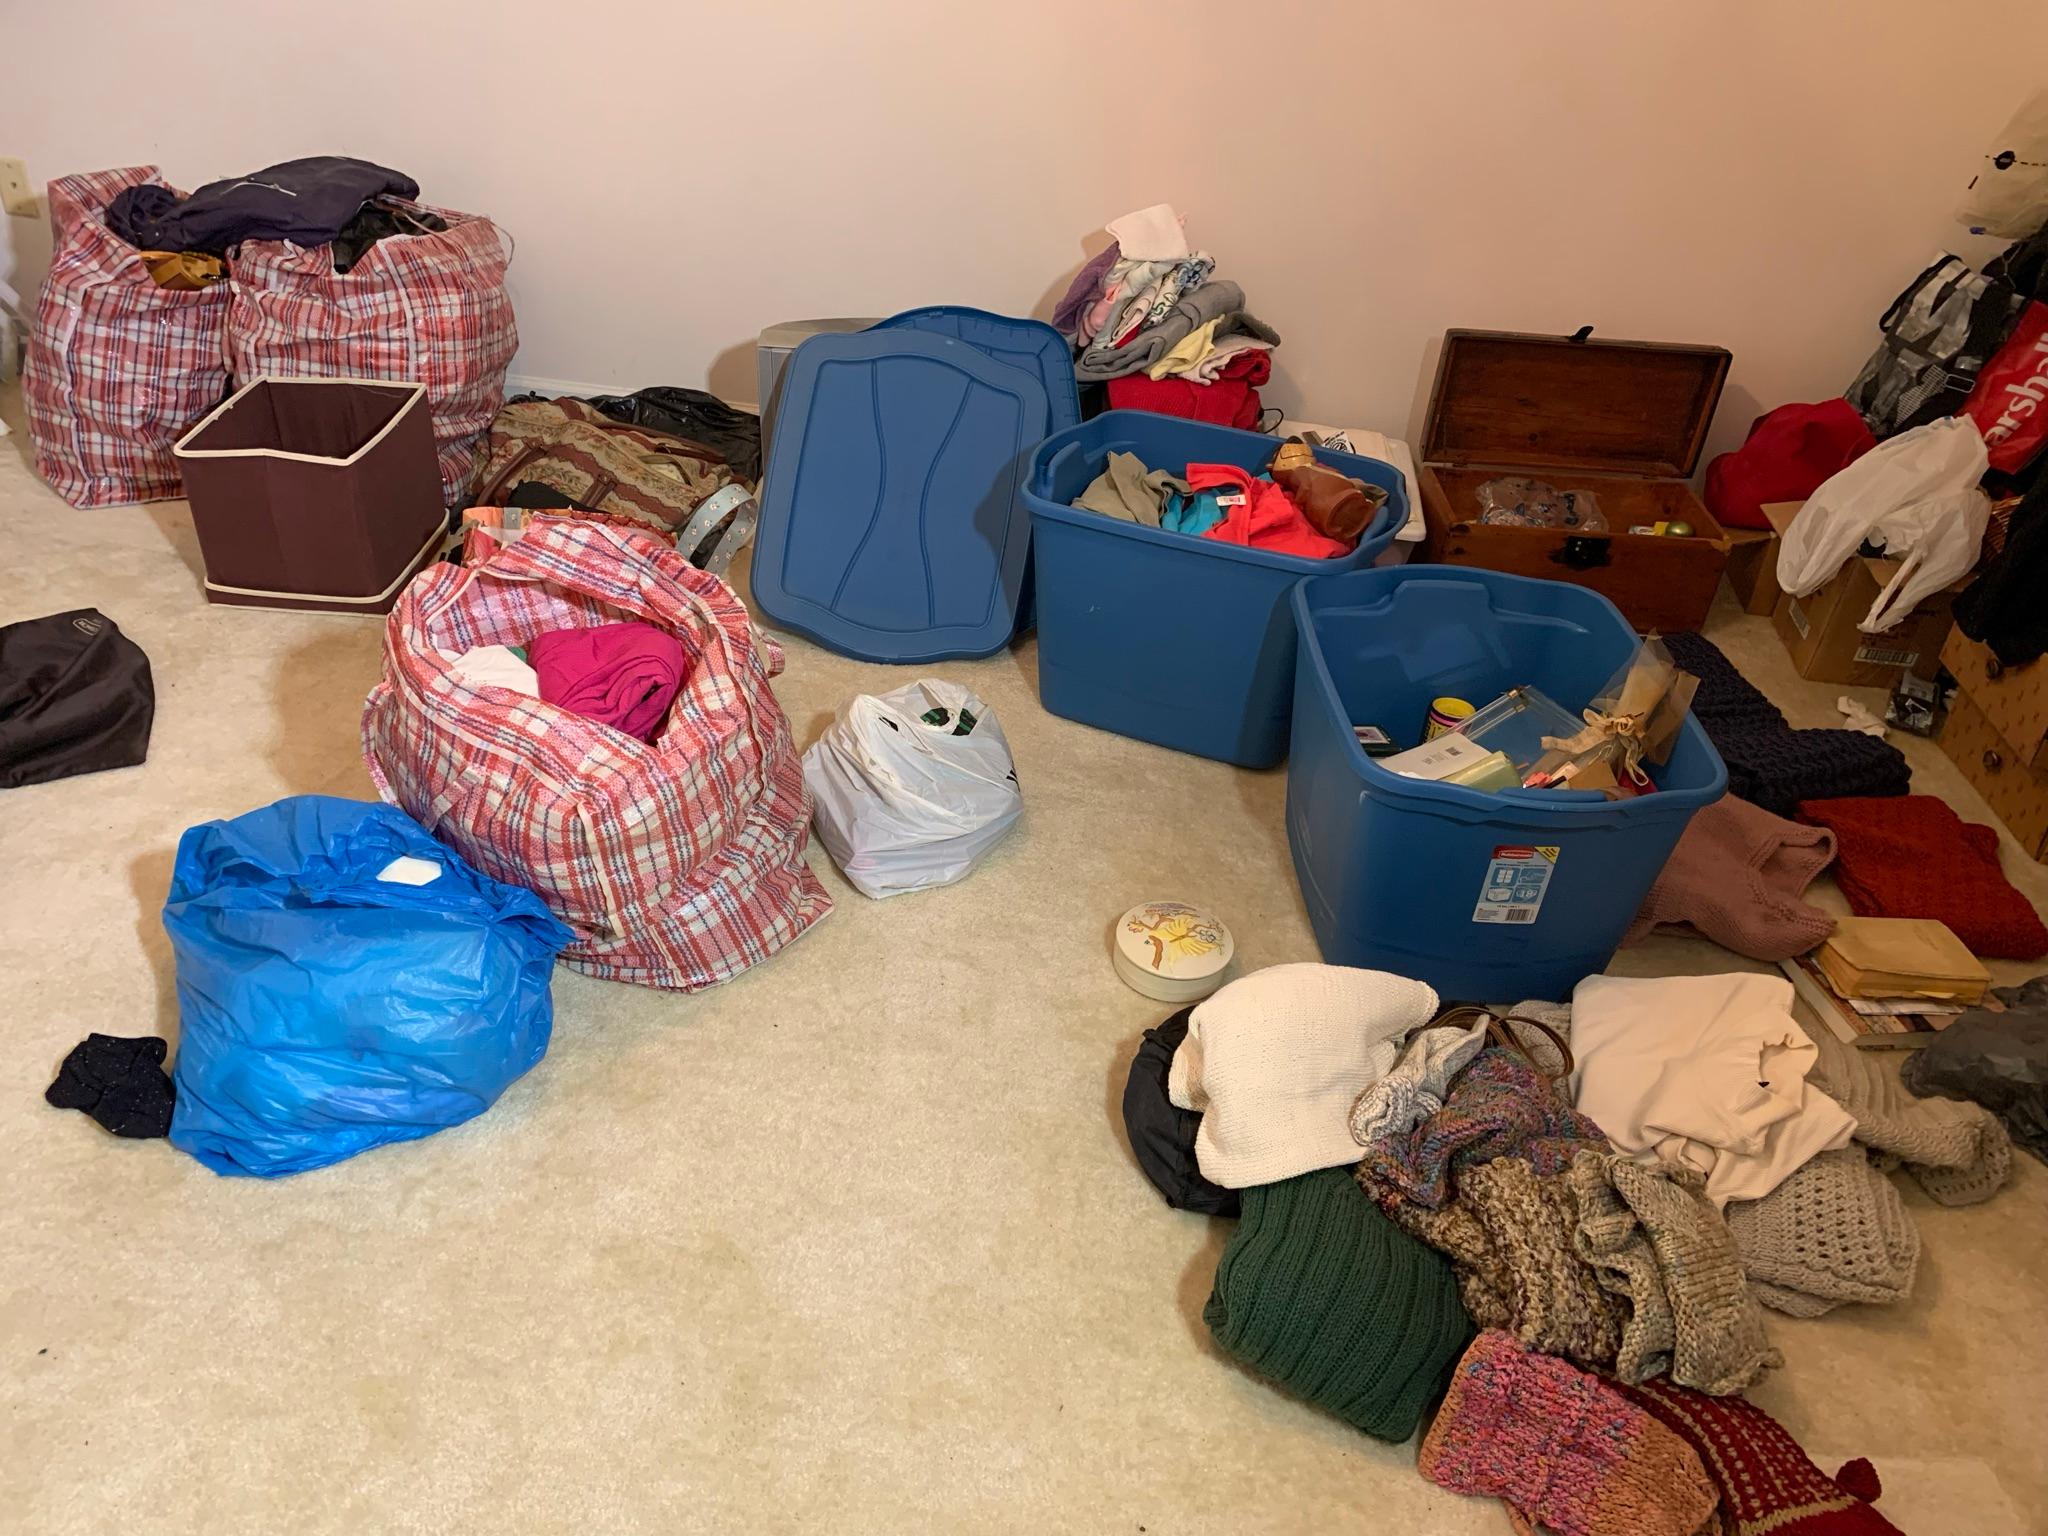 Huge Bedroom Clean Out - Women's Clothing Sizes Large and XL, Shoes 71/2 & 8, Purses & More